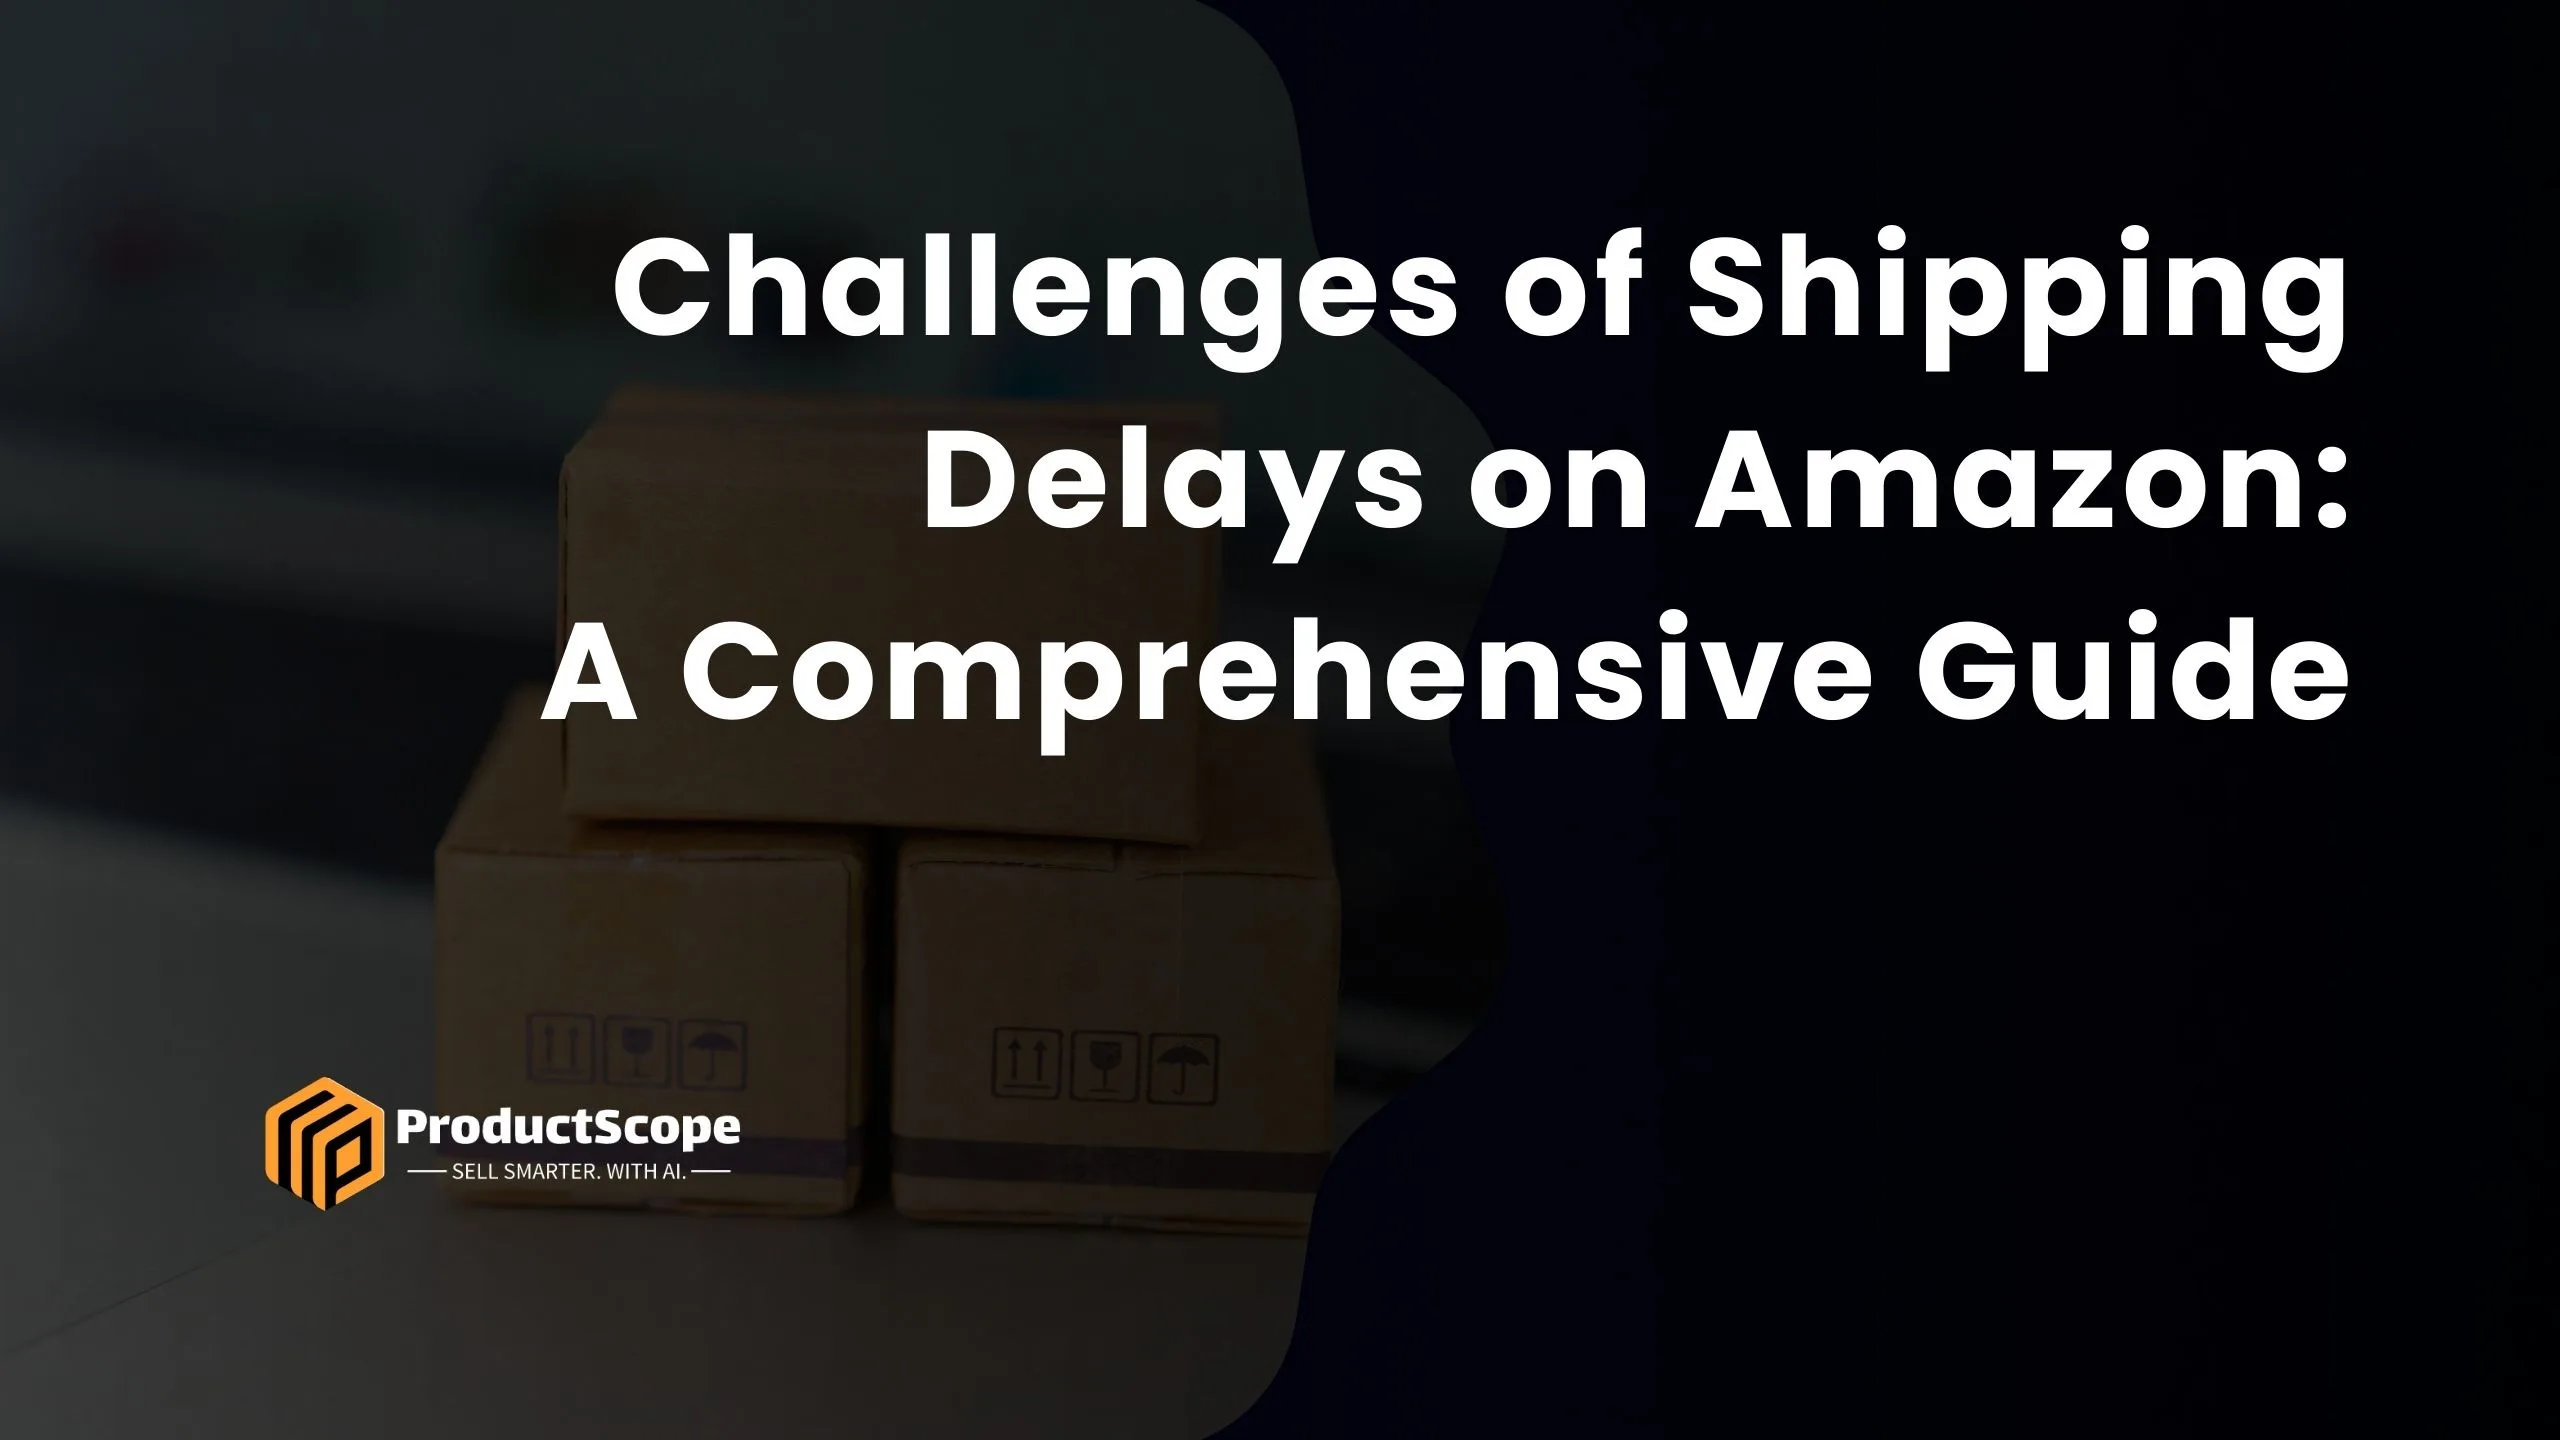 Challenges of Shipping Delays on Amazon: A Comprehensive Guide